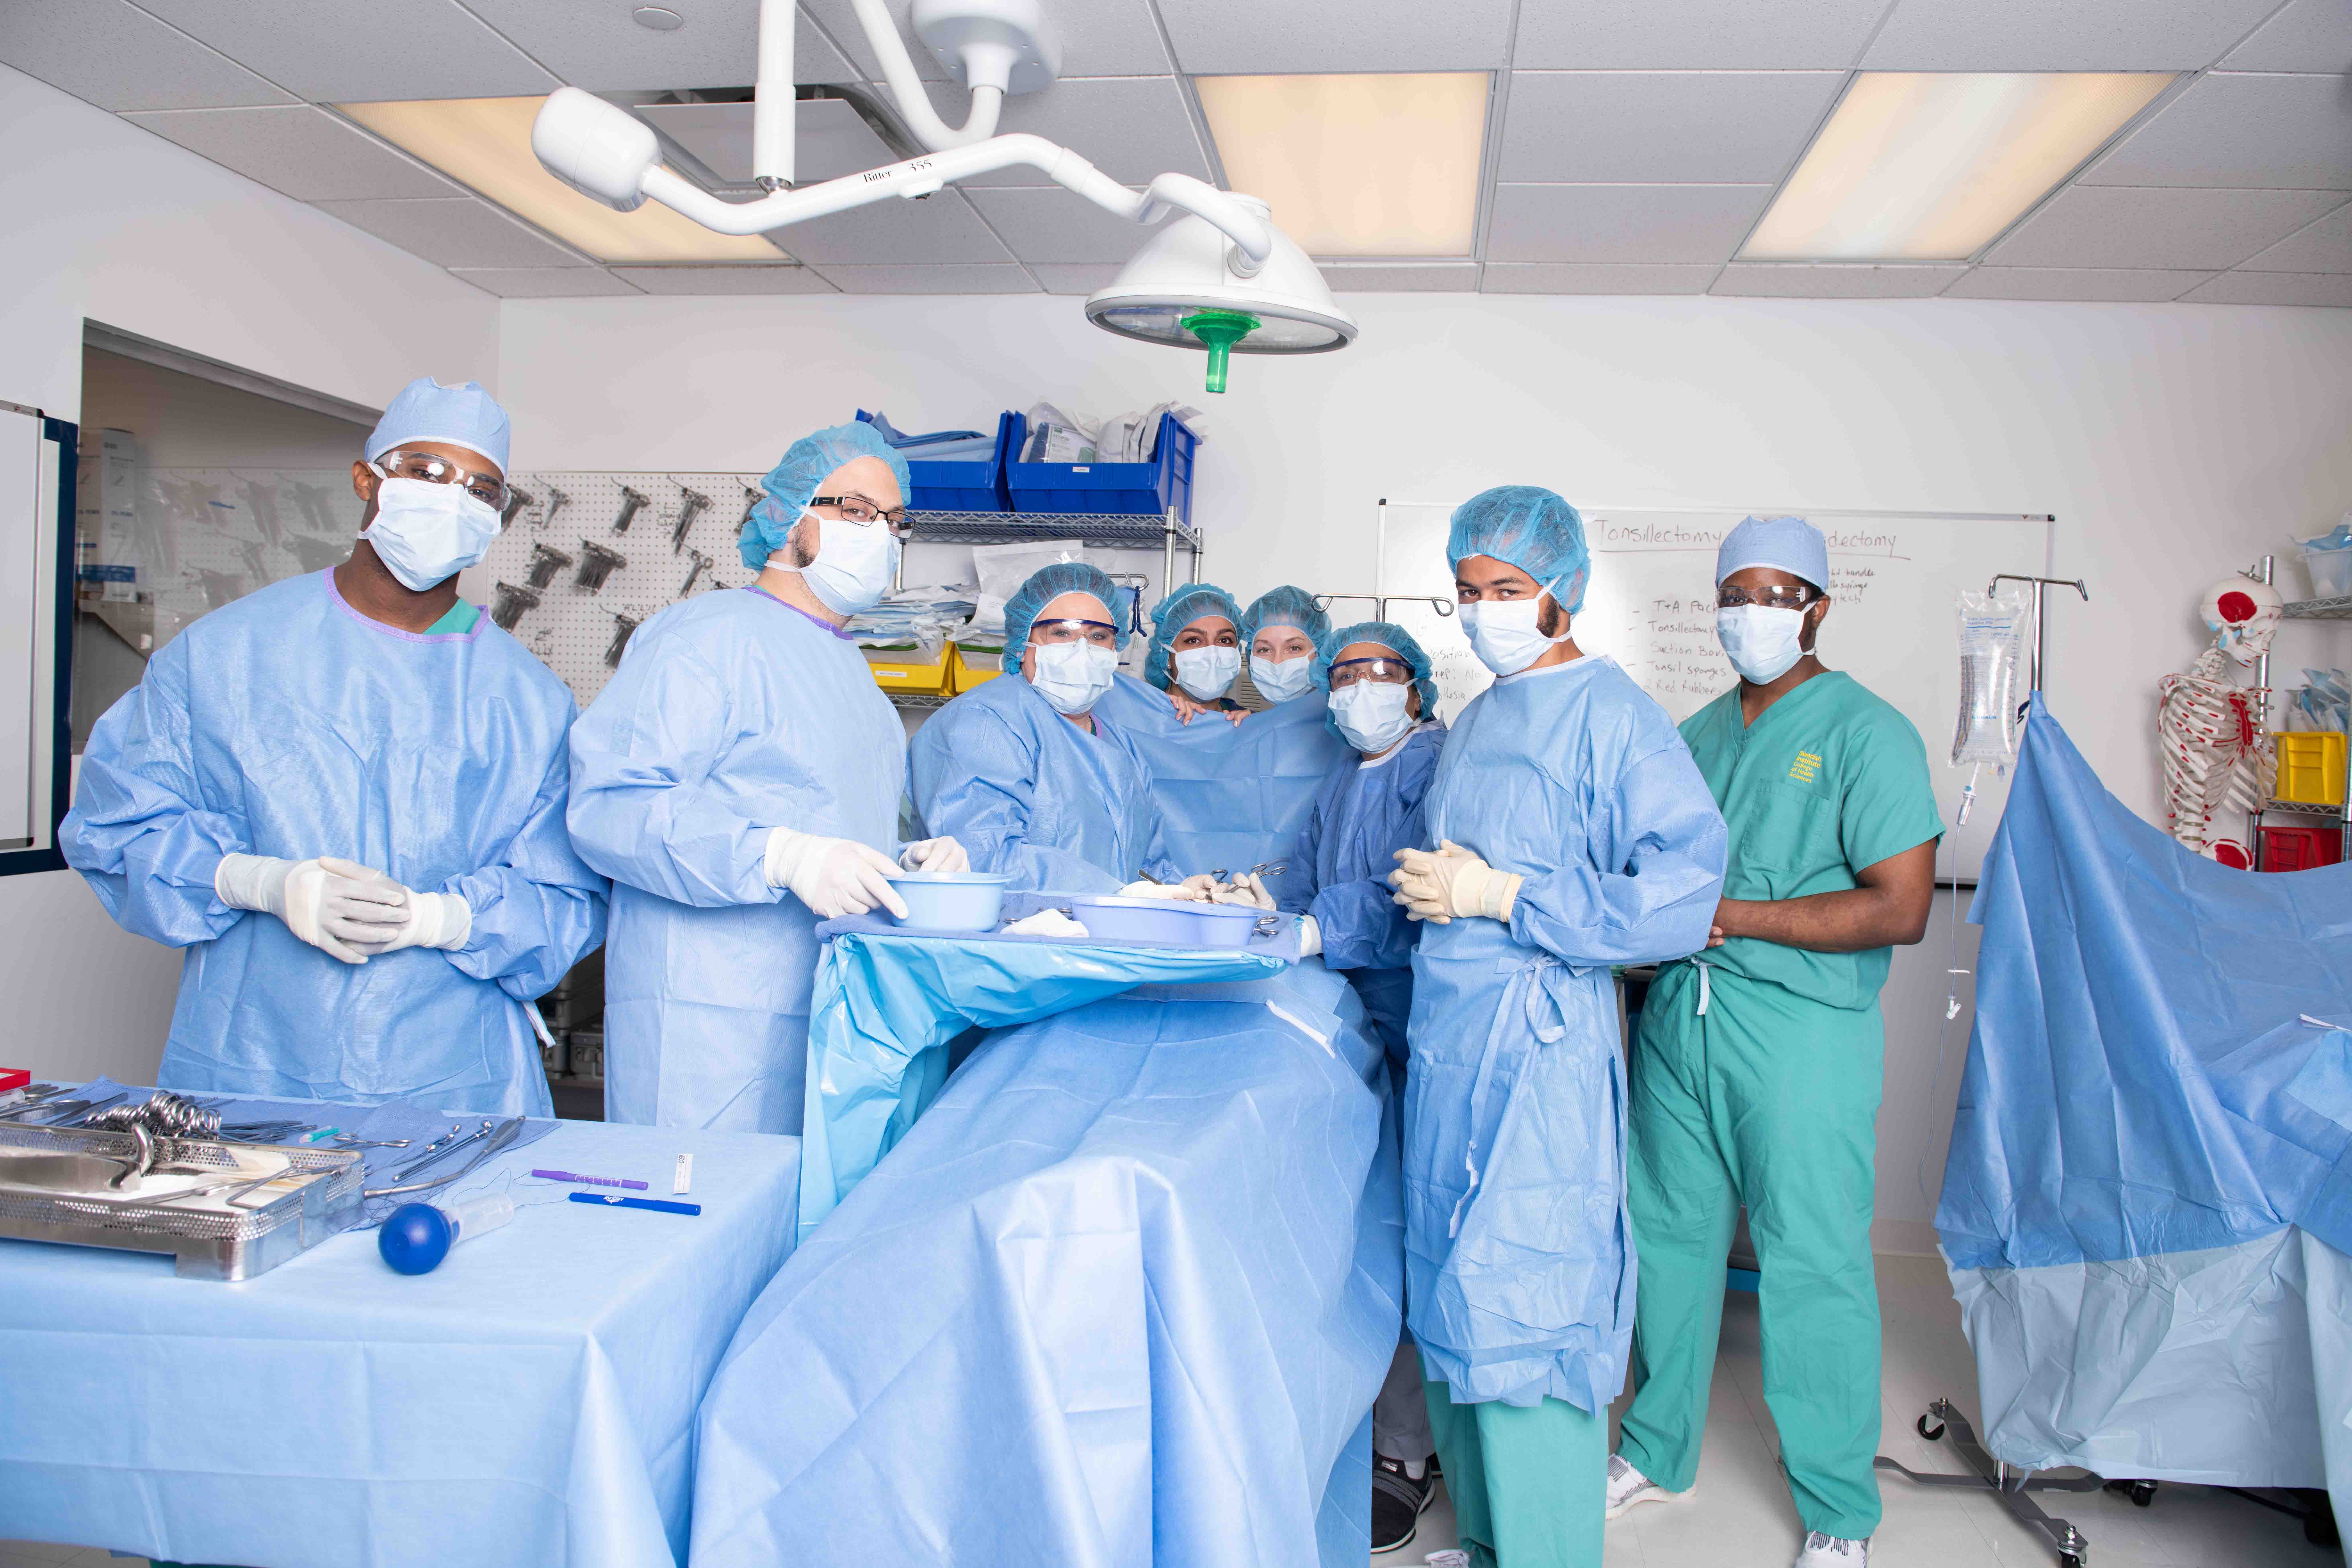 The Cutting-edge Field Of Surgical Technology - Swedish Institute